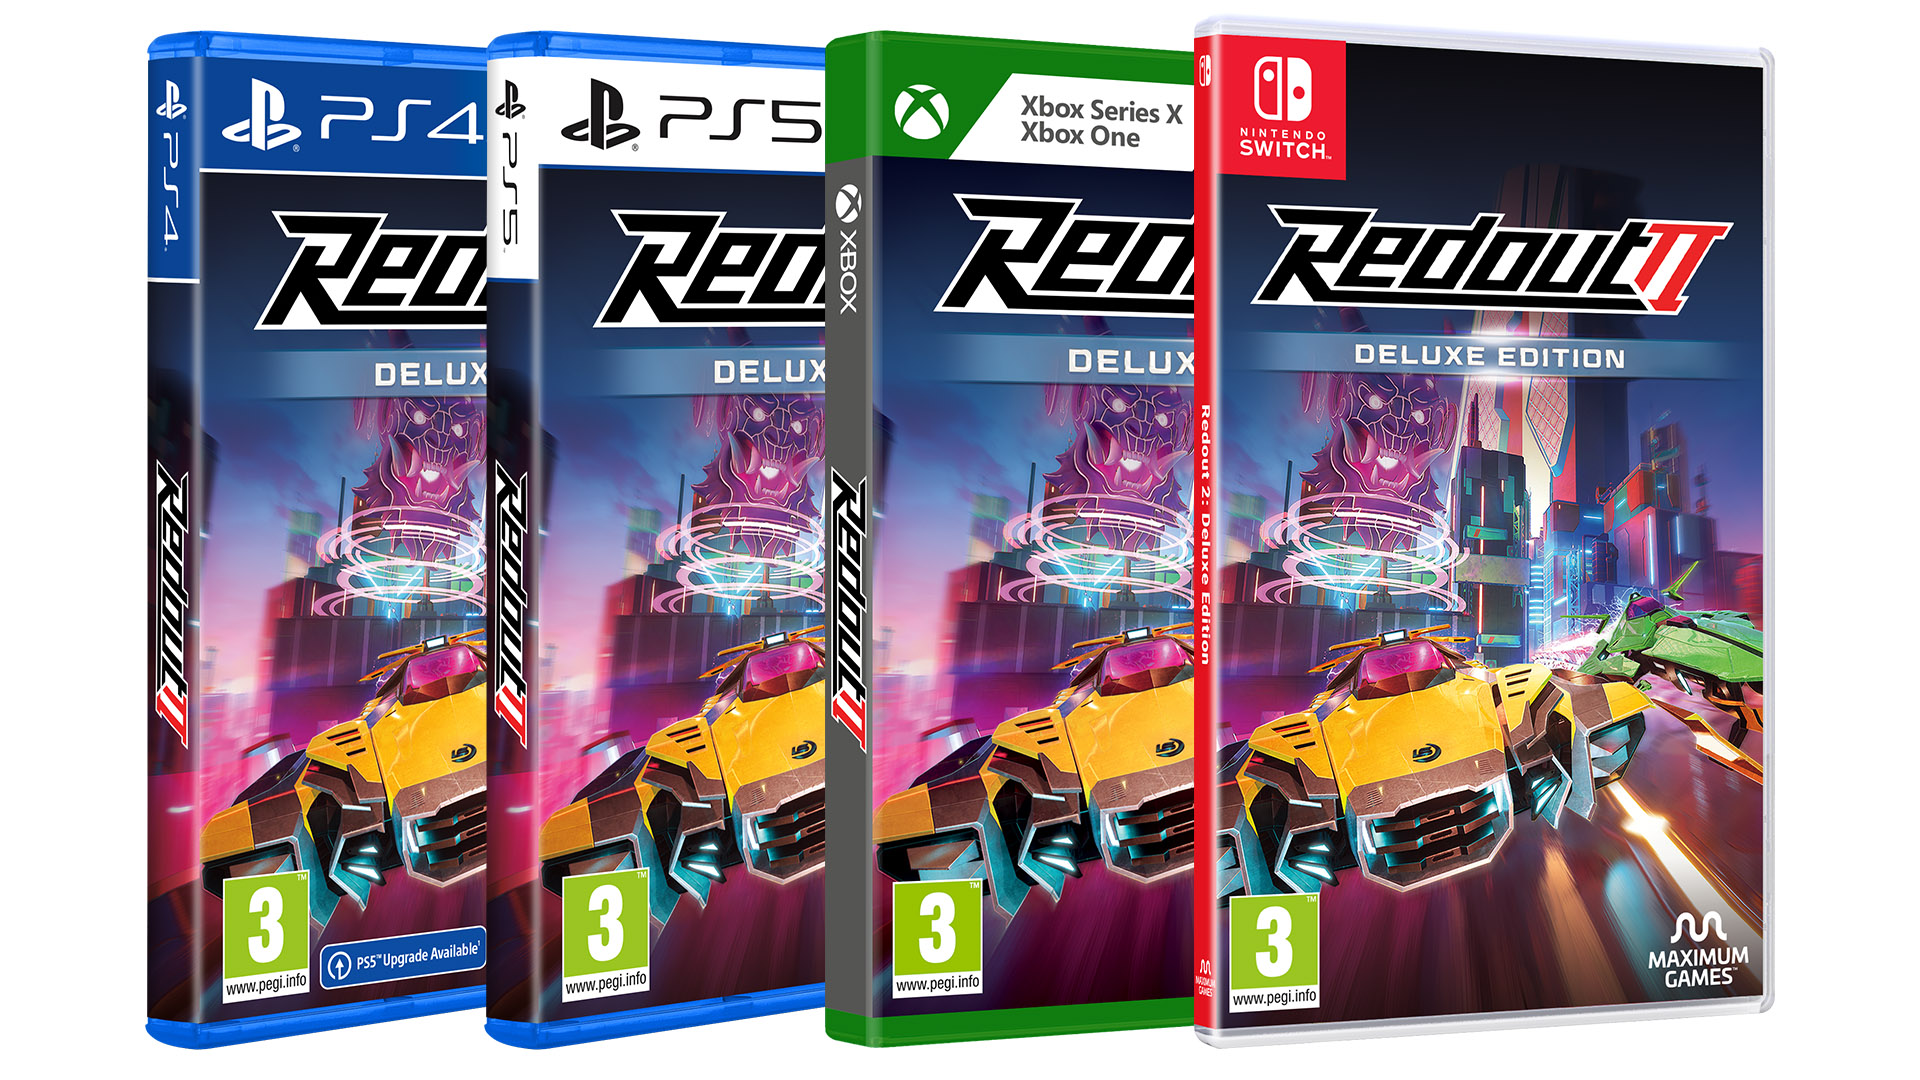 Redout 2: Deluxe Edition